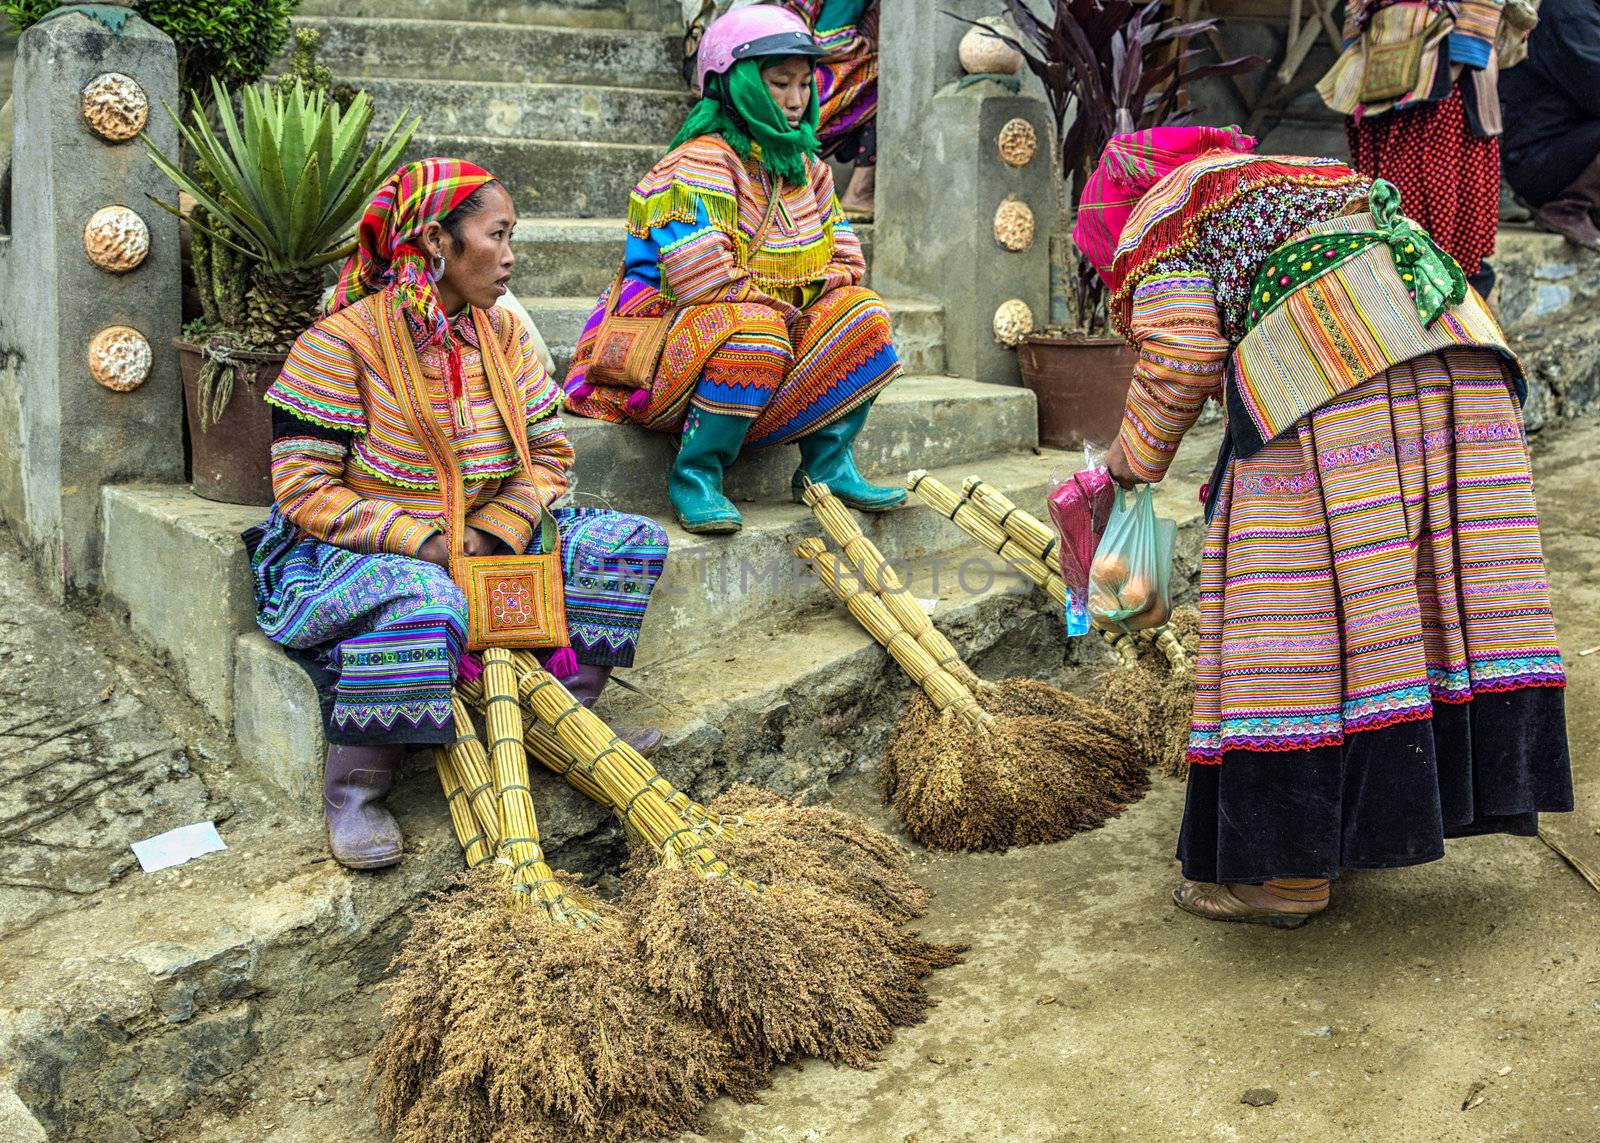 Vietnam Bac Ha - March 2012: Hmong women selling brooms on Sunda by Claudine